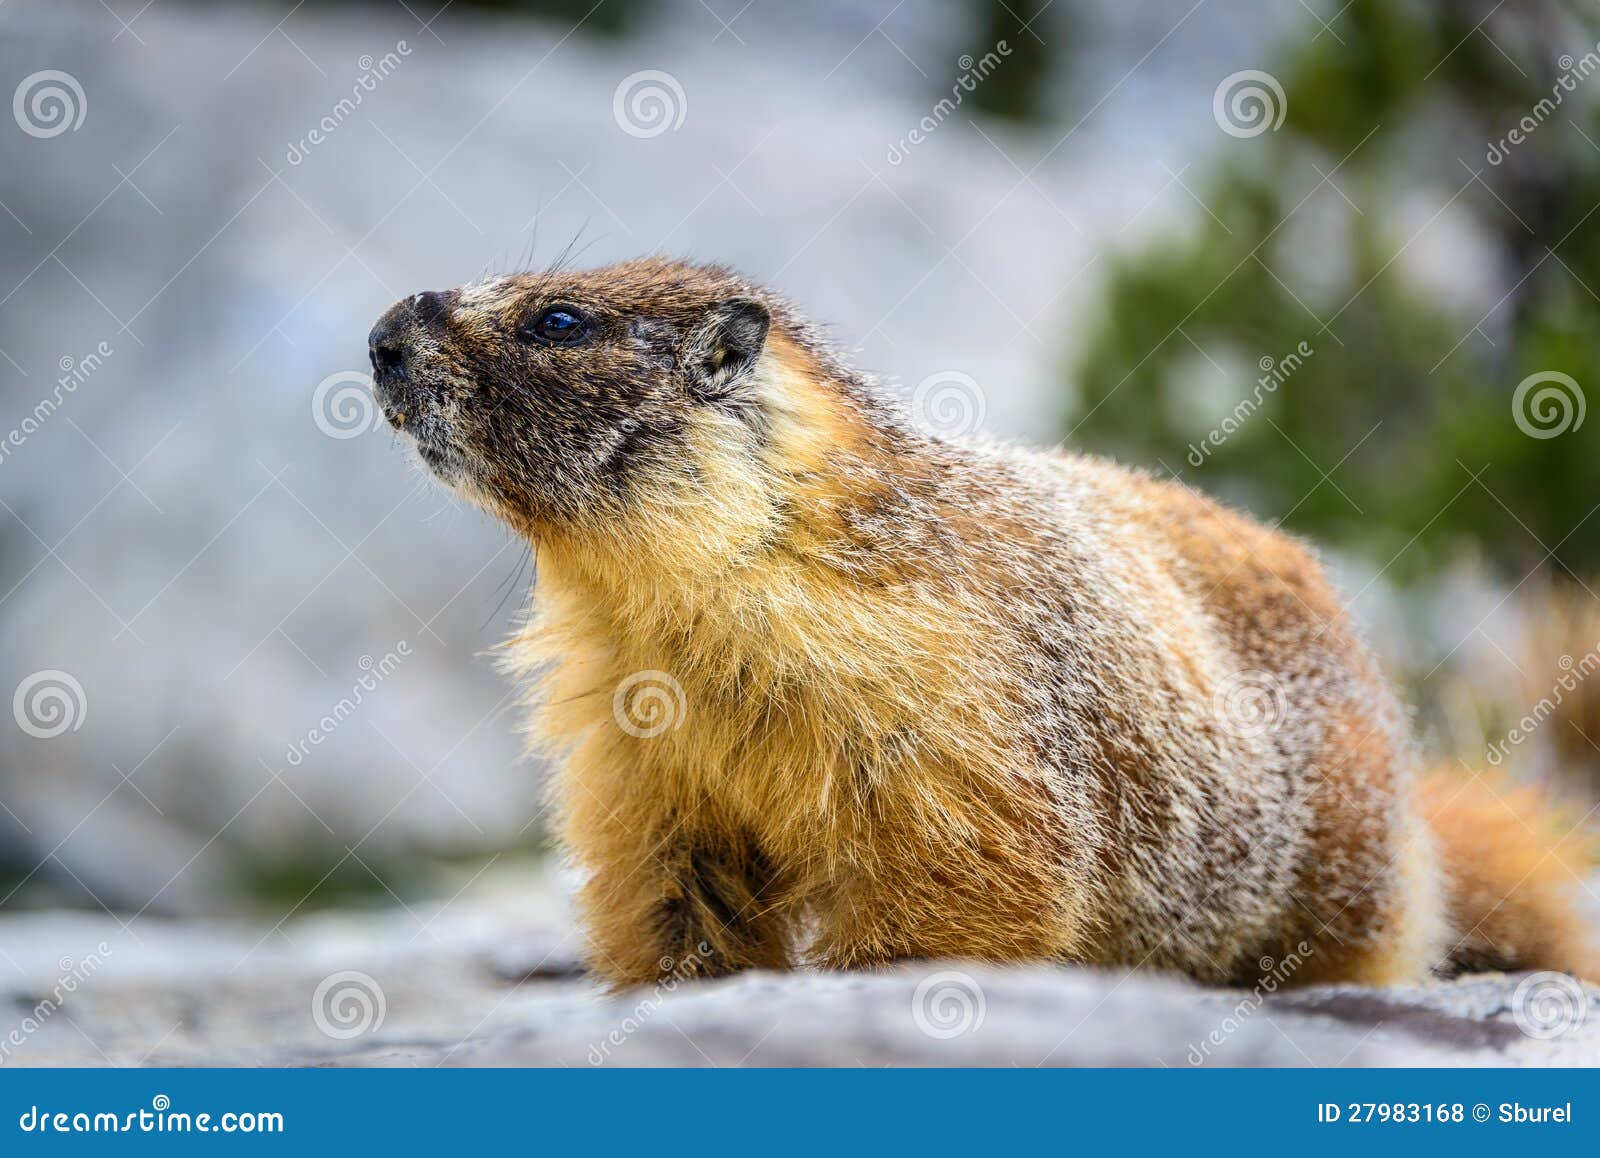 yellow bellied marmot, sequoia national park